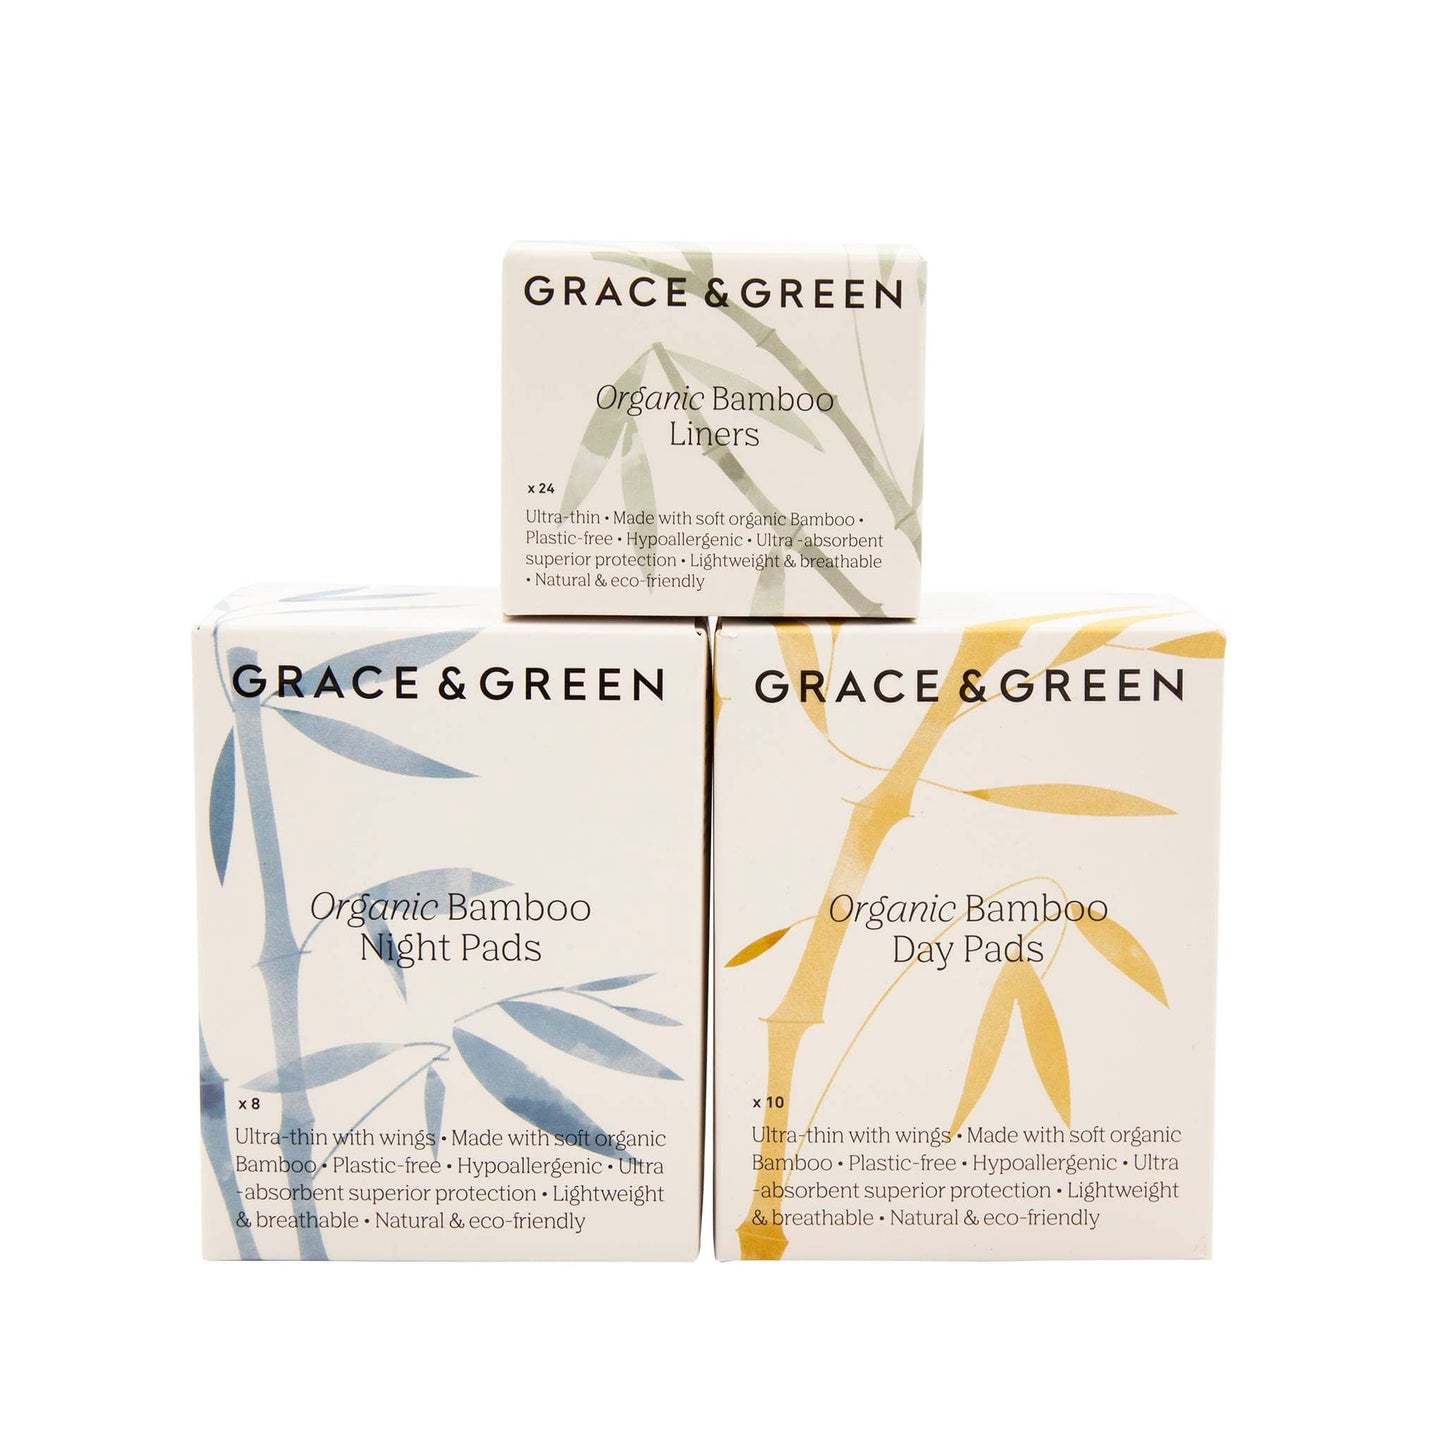 Grace & Green Period Products Organic Bamboo Ultra-thin Liners - Grace & Green